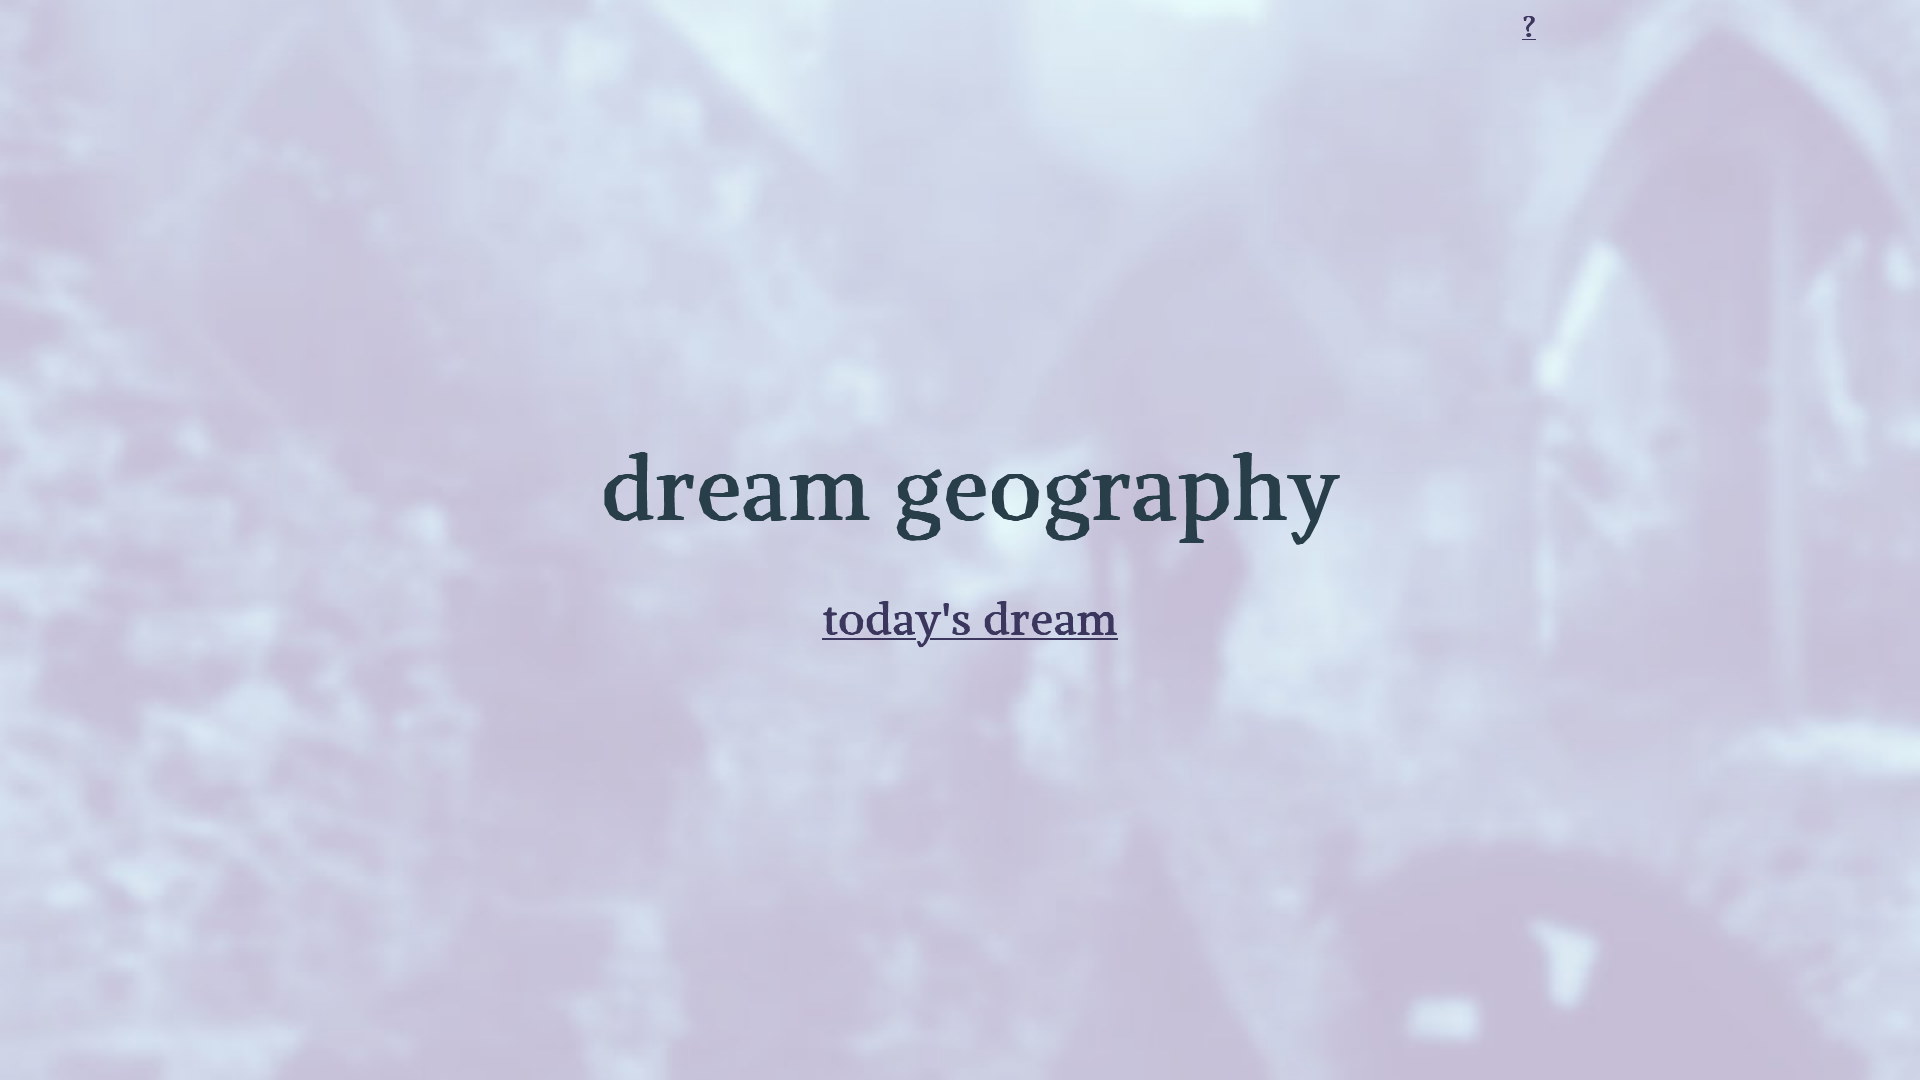 Screenshot of the dream geography's title page, showing the text 'dream geography' and a link titled 'Today's dream'